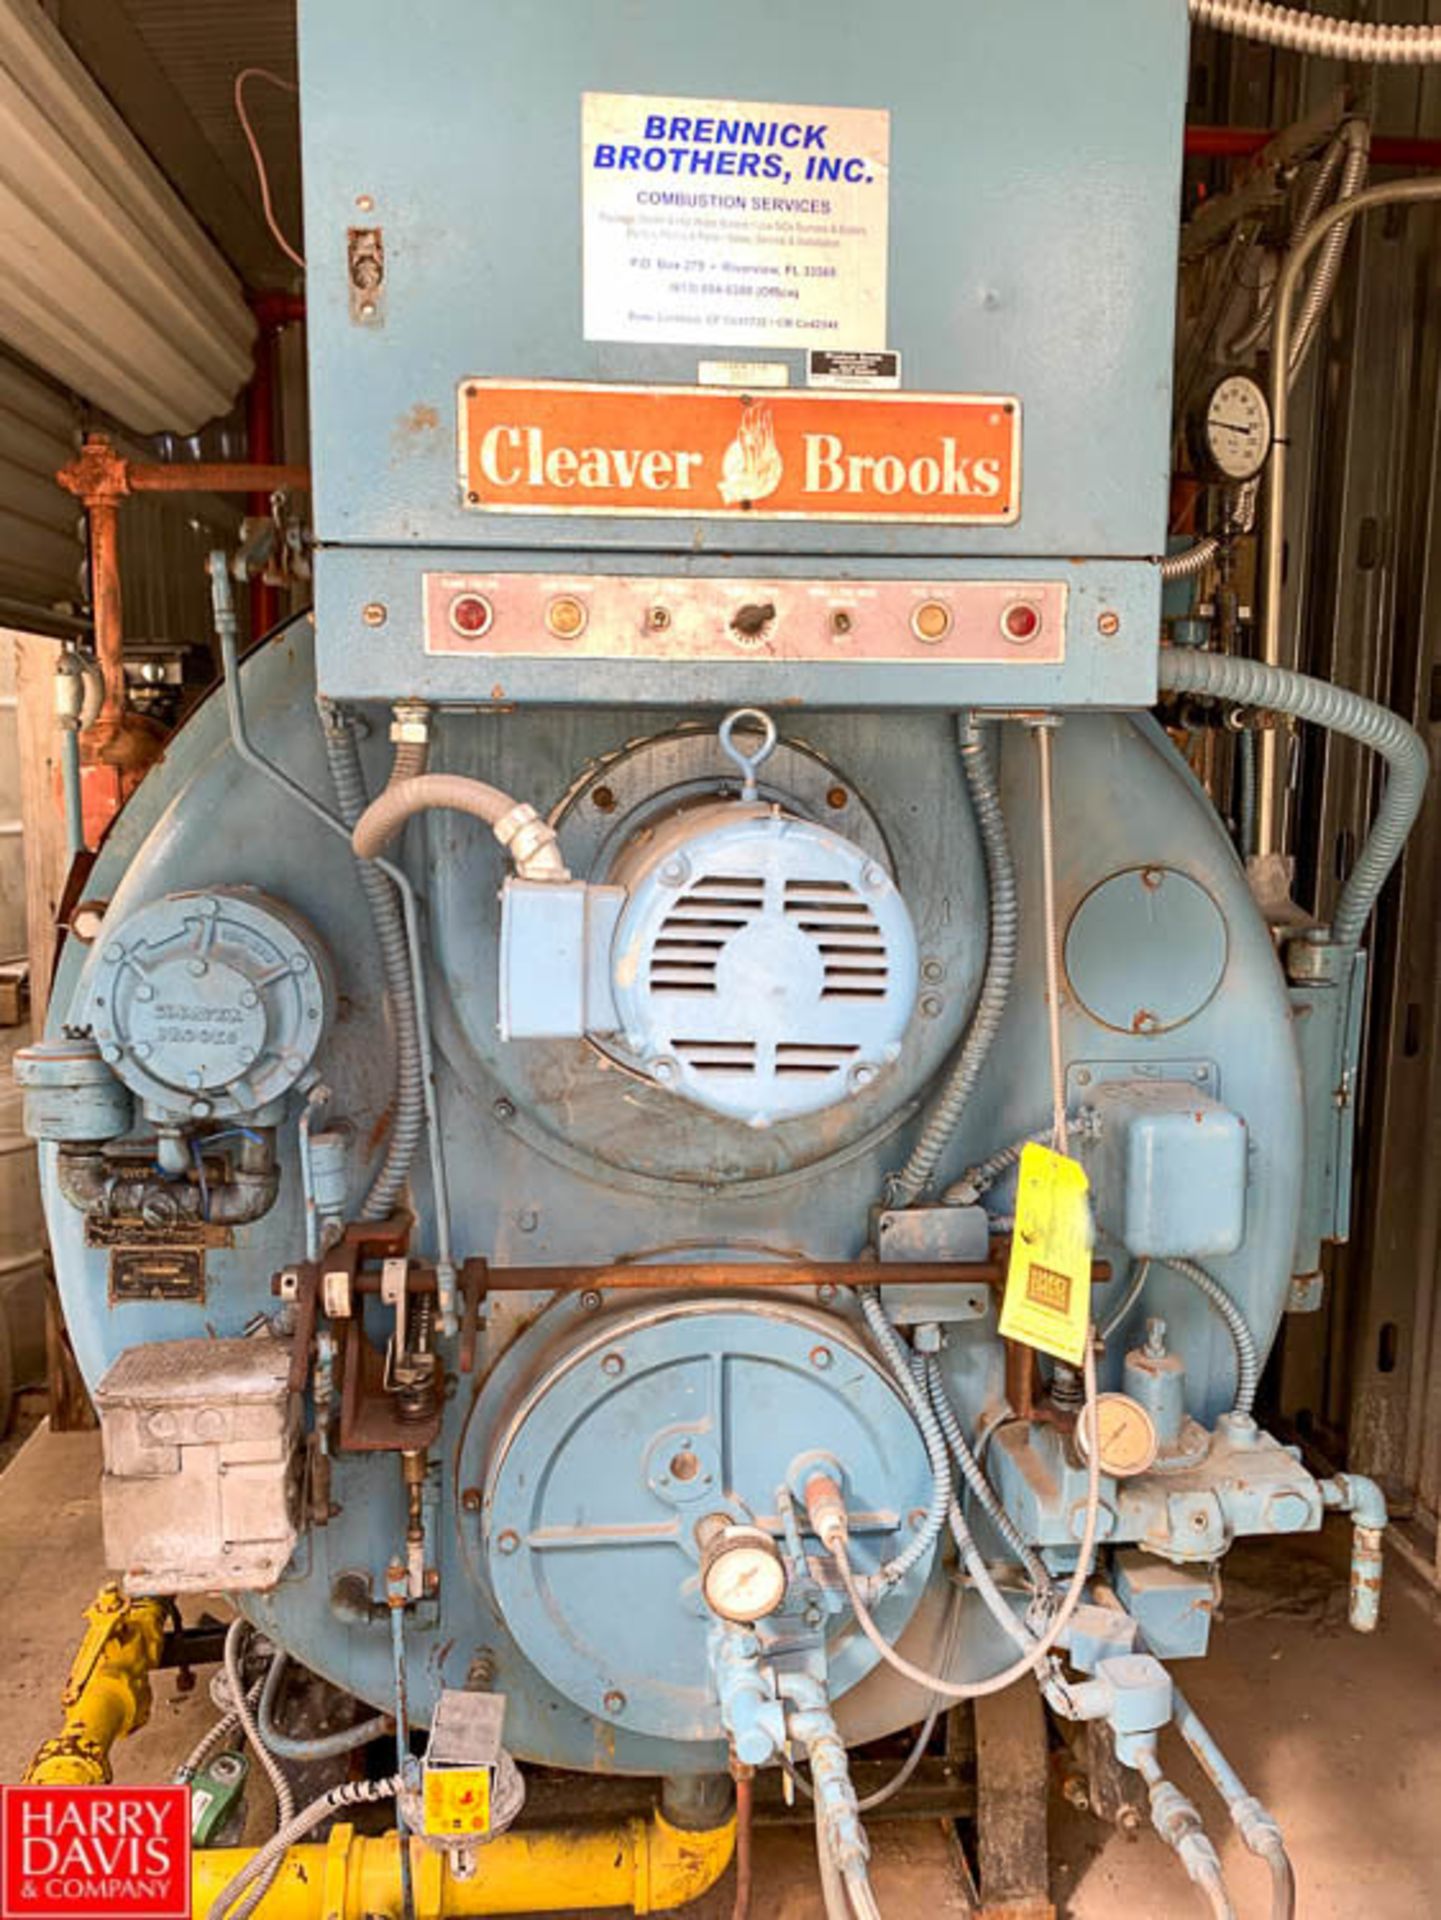 Cleaver Brooks Boiler, 150 Psi, Model CB170-1005, S/N 1-24382, with Feed System Rigging: $2650